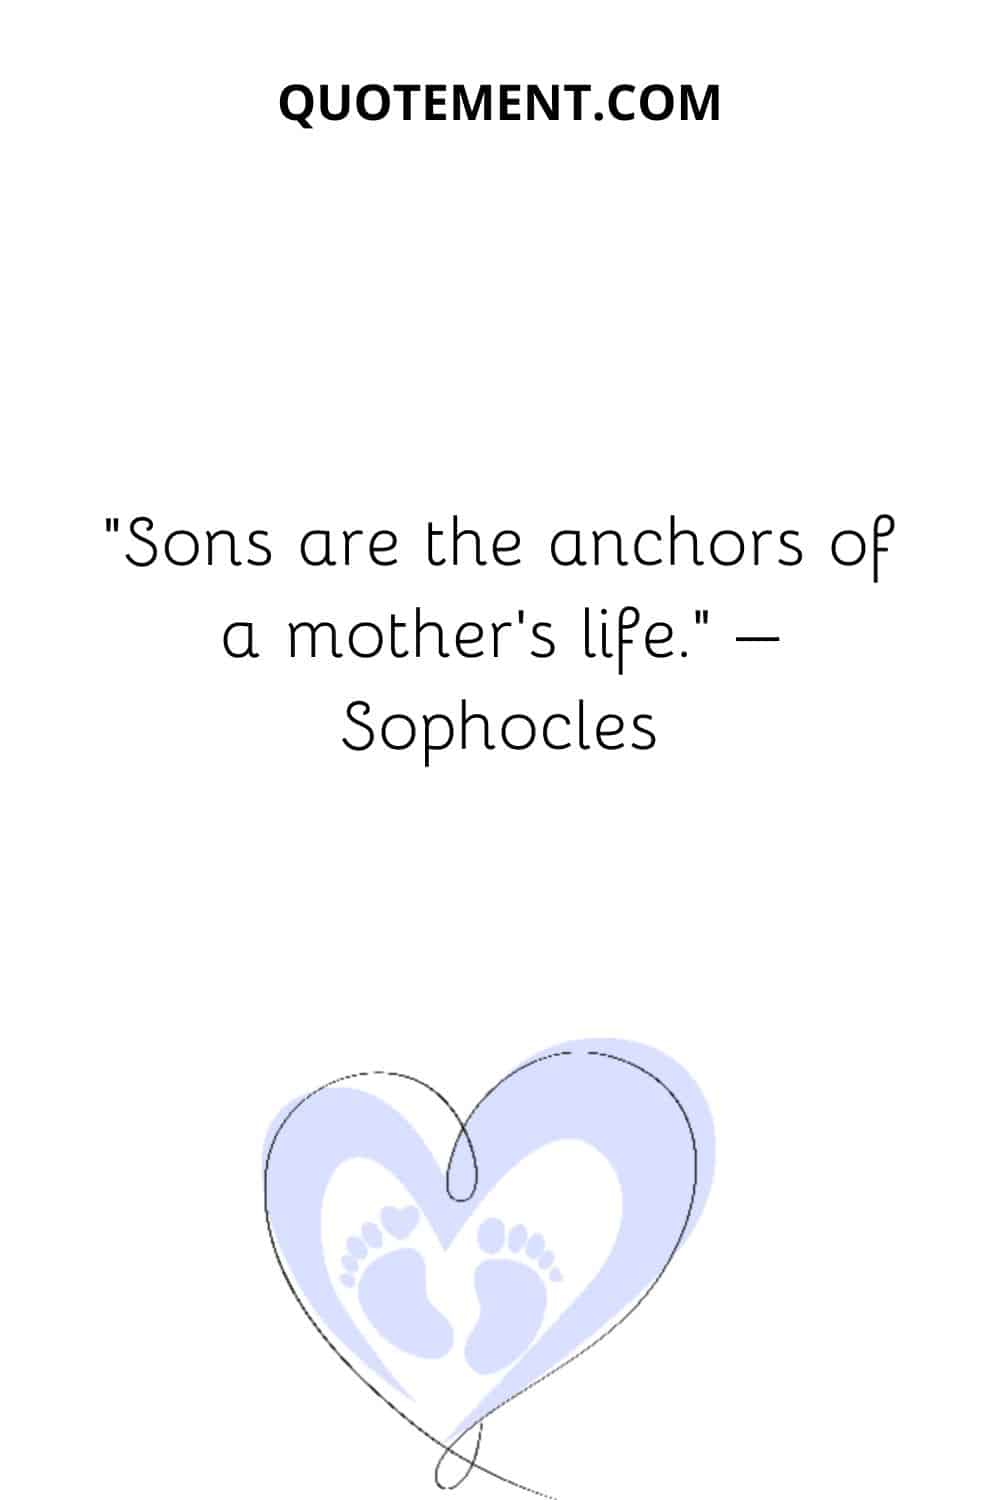 Sons are the anchors of a mother’s life